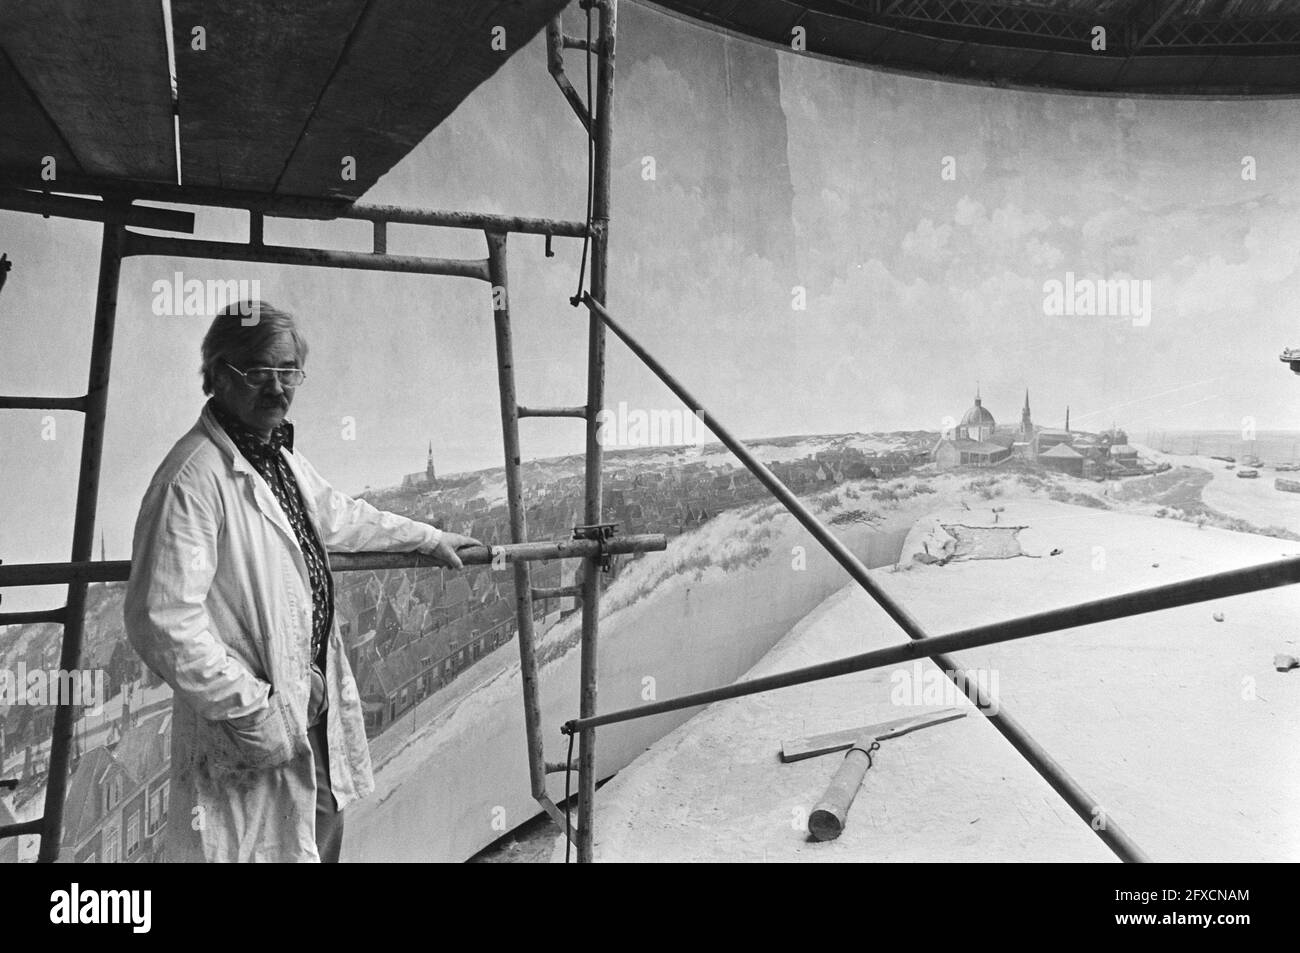 Panorama Mesdag in The Hague, 2 April 1976, The Netherlands, 20th century press agency photo, news to remember, documentary, historic photography 1945-1990, visual stories, human history of the Twentieth Century, capturing moments in time Stock Photo